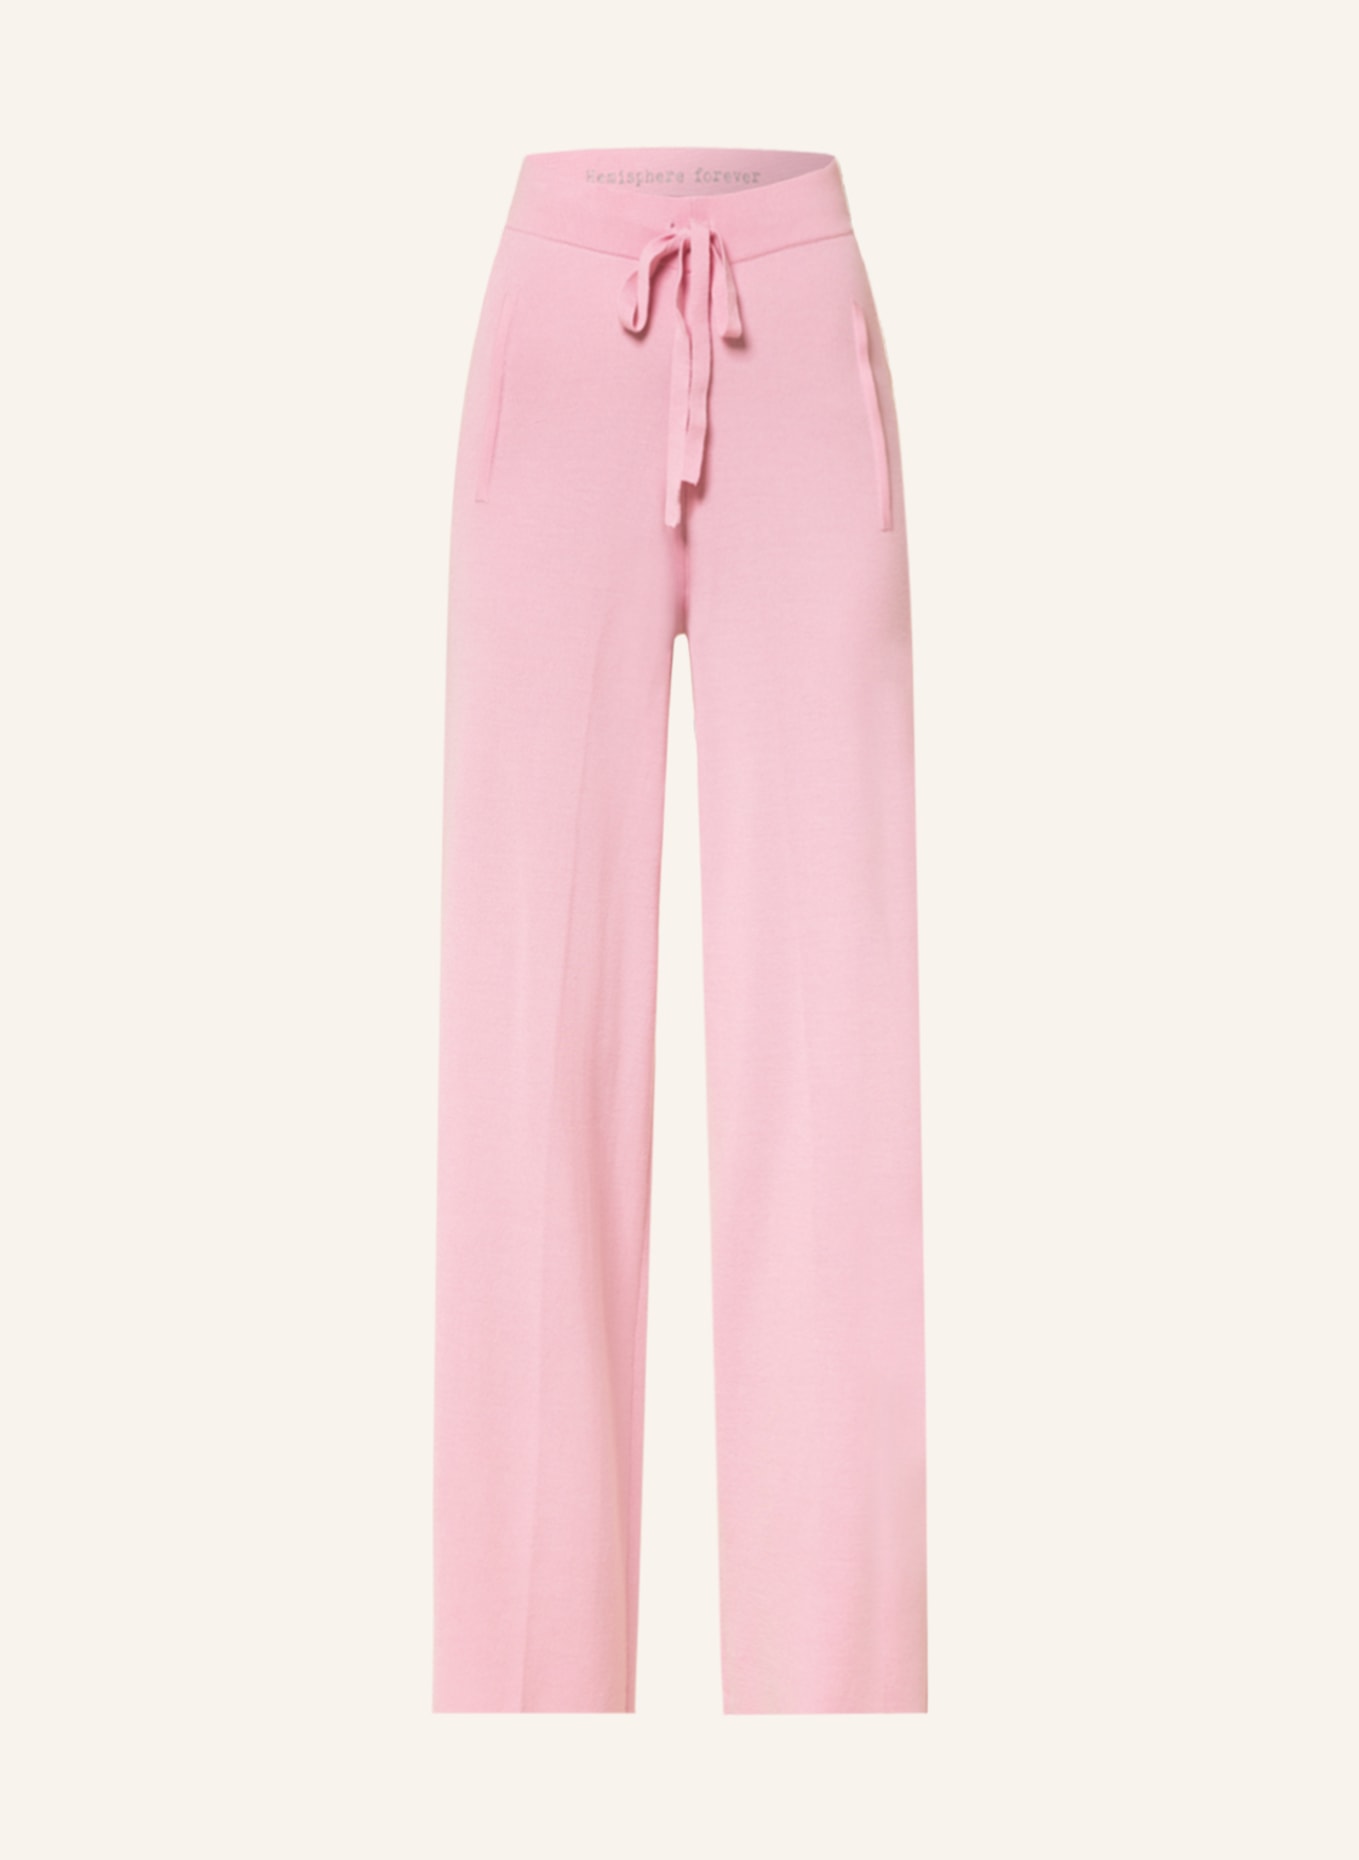 HEMISPHERE Pants in jogger style, Color: PINK (Image 1)